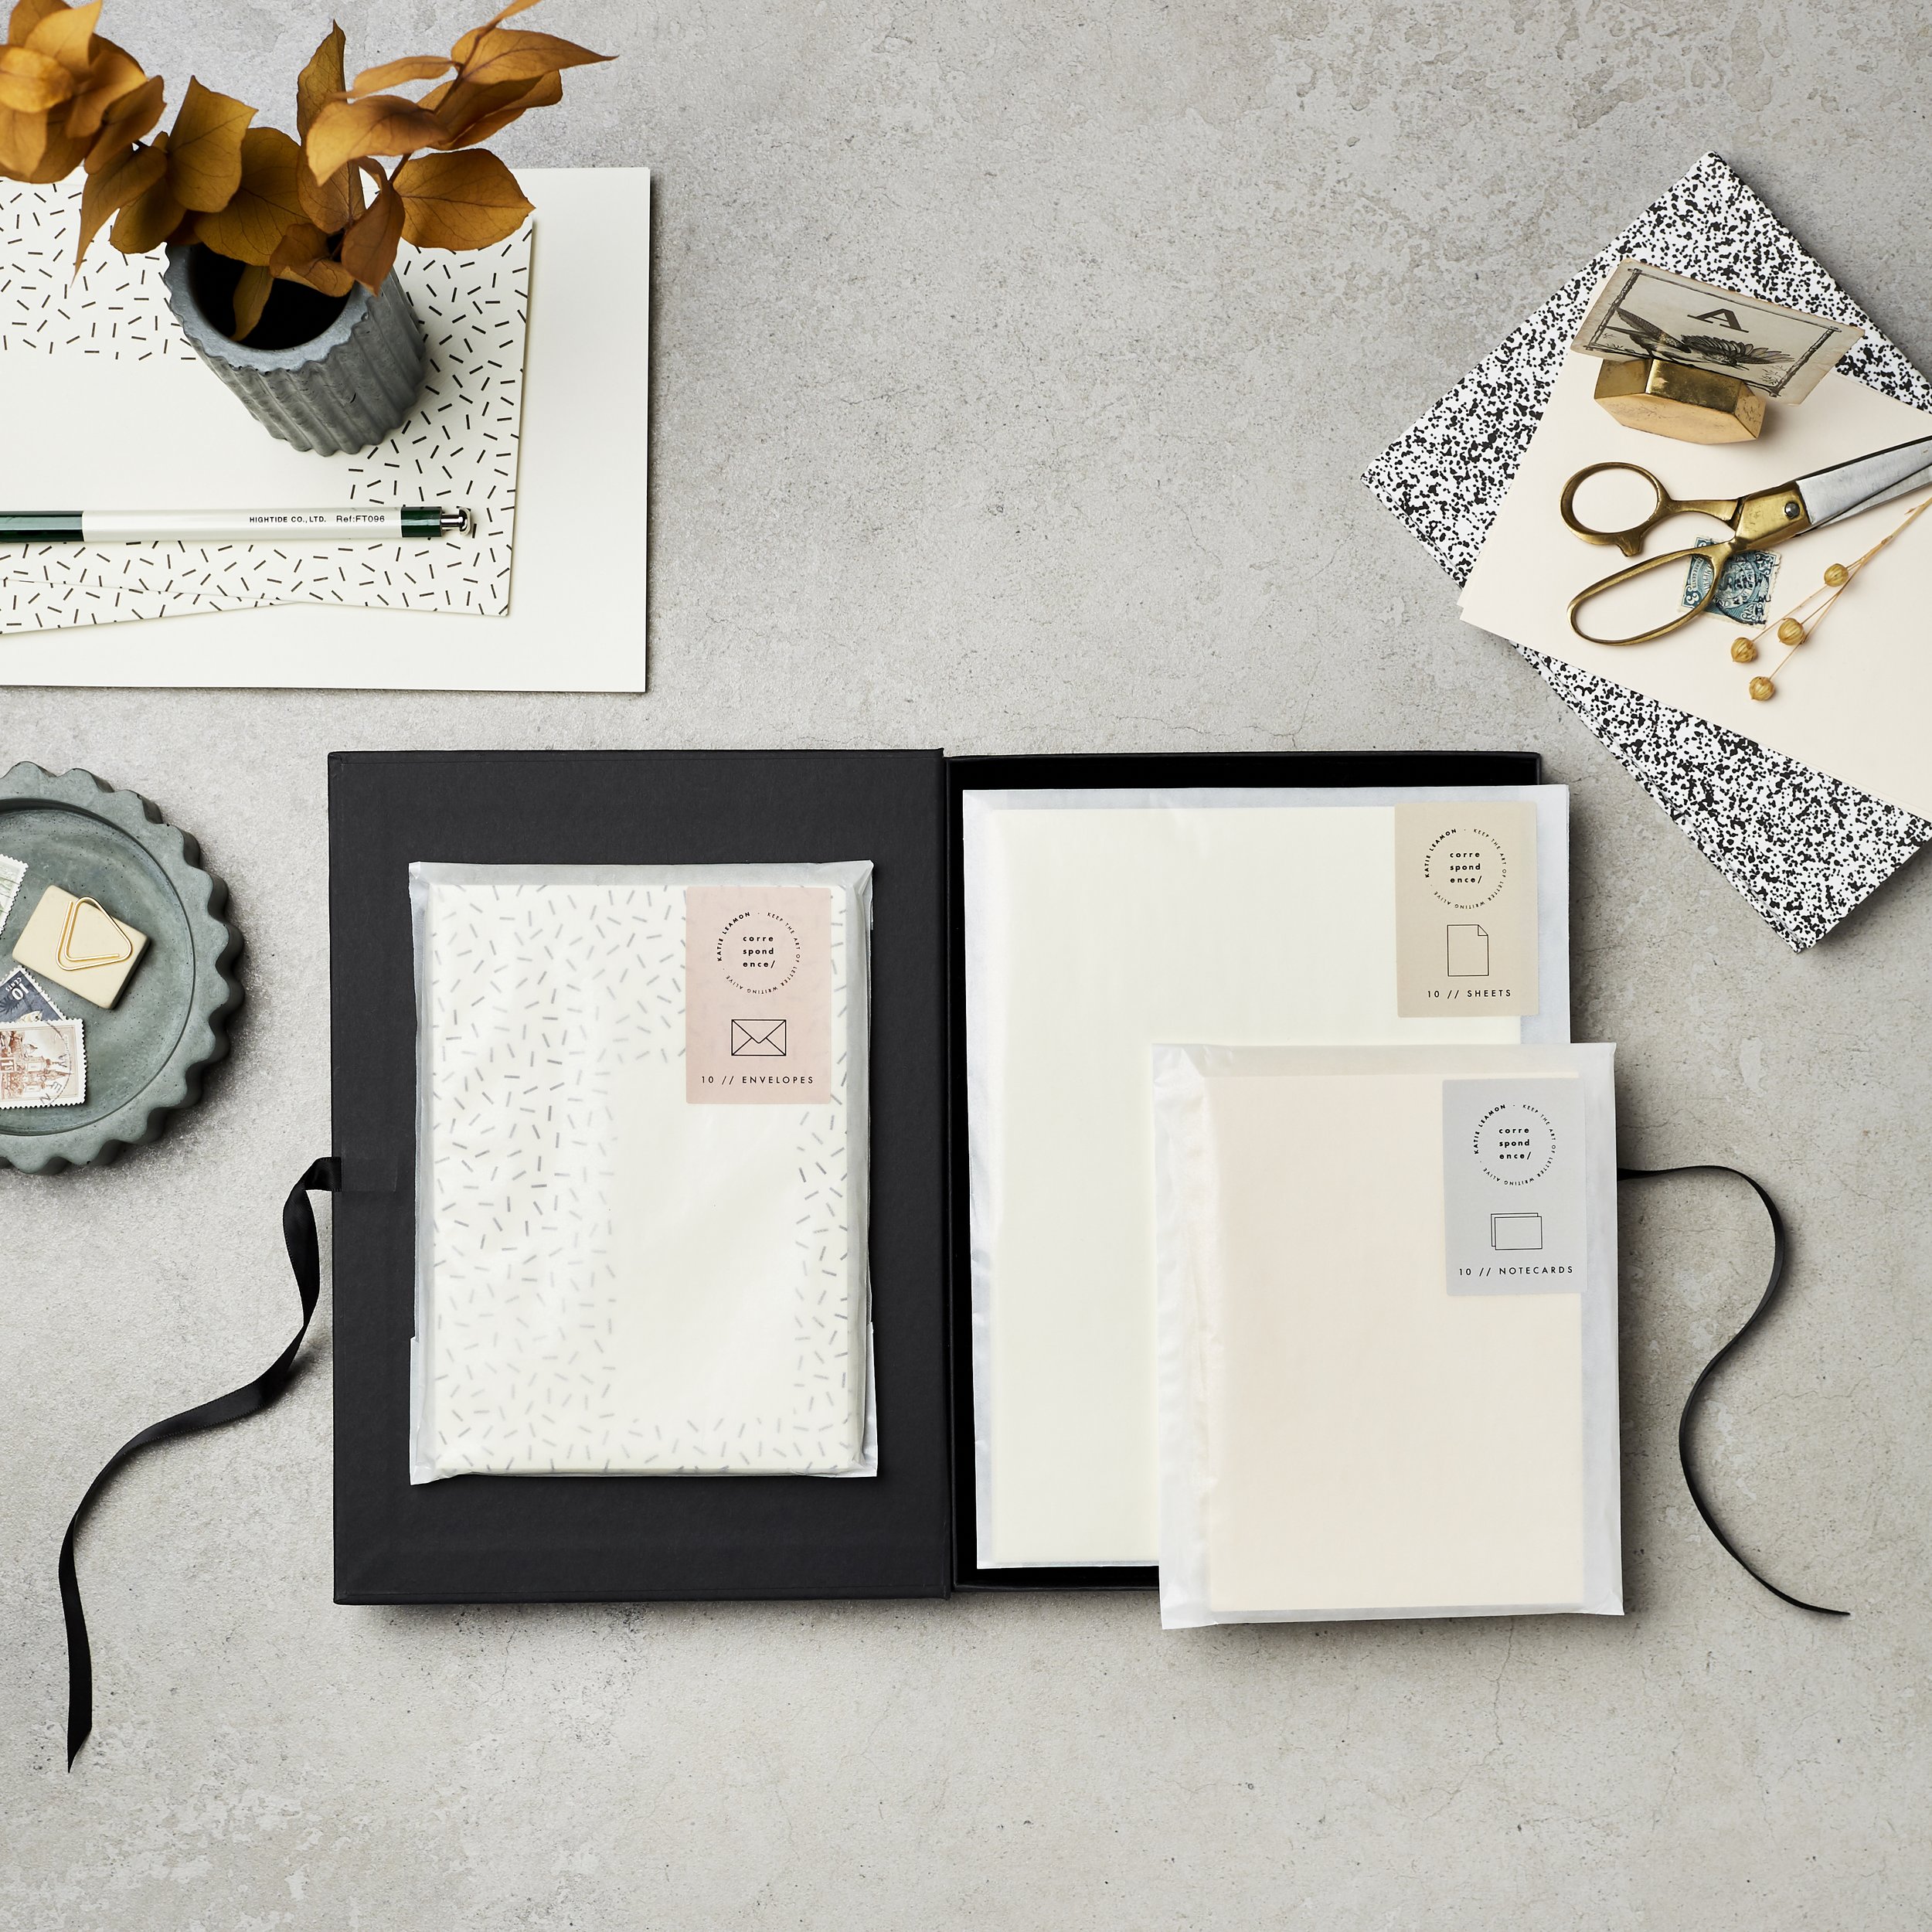 Beautifully packaged stationery on a tabletop